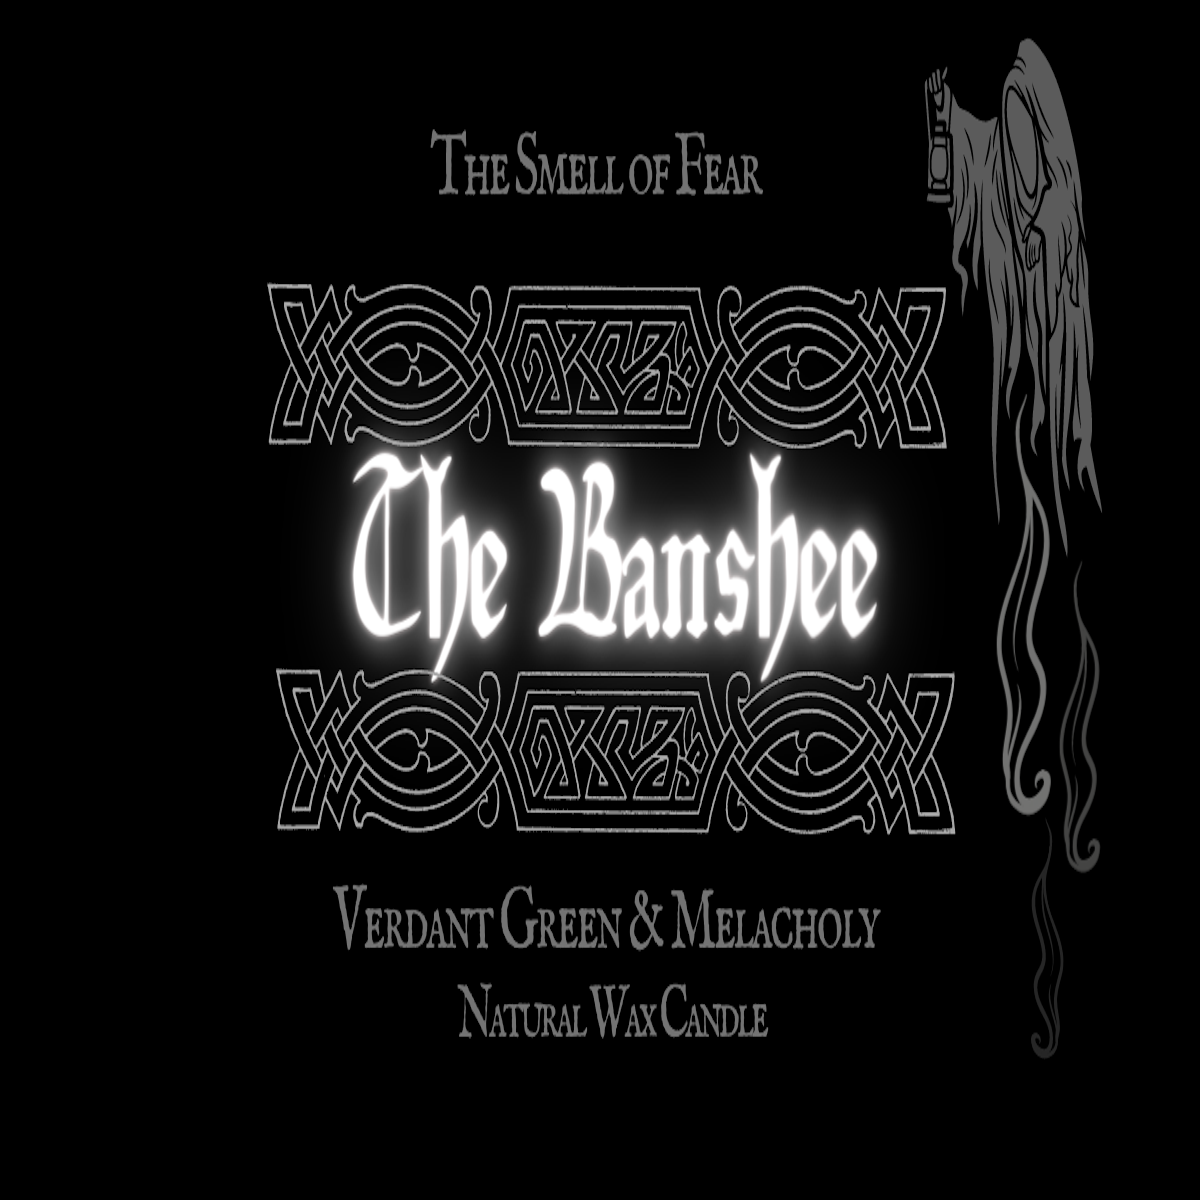 The Banshee Candle - The Smell of Fear 